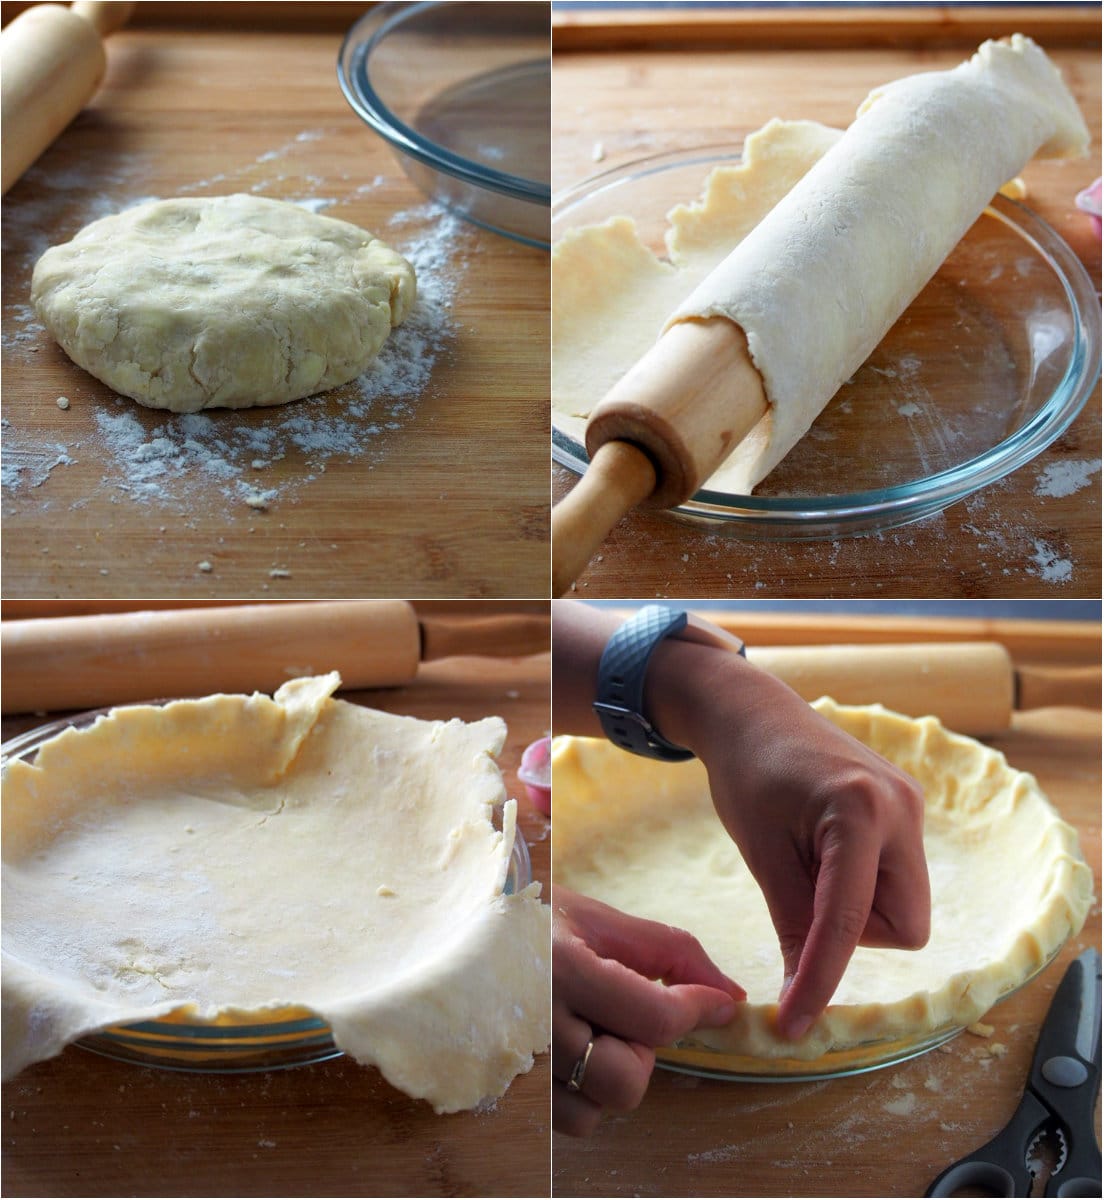 Assembling the pastry dough into the pie pan.